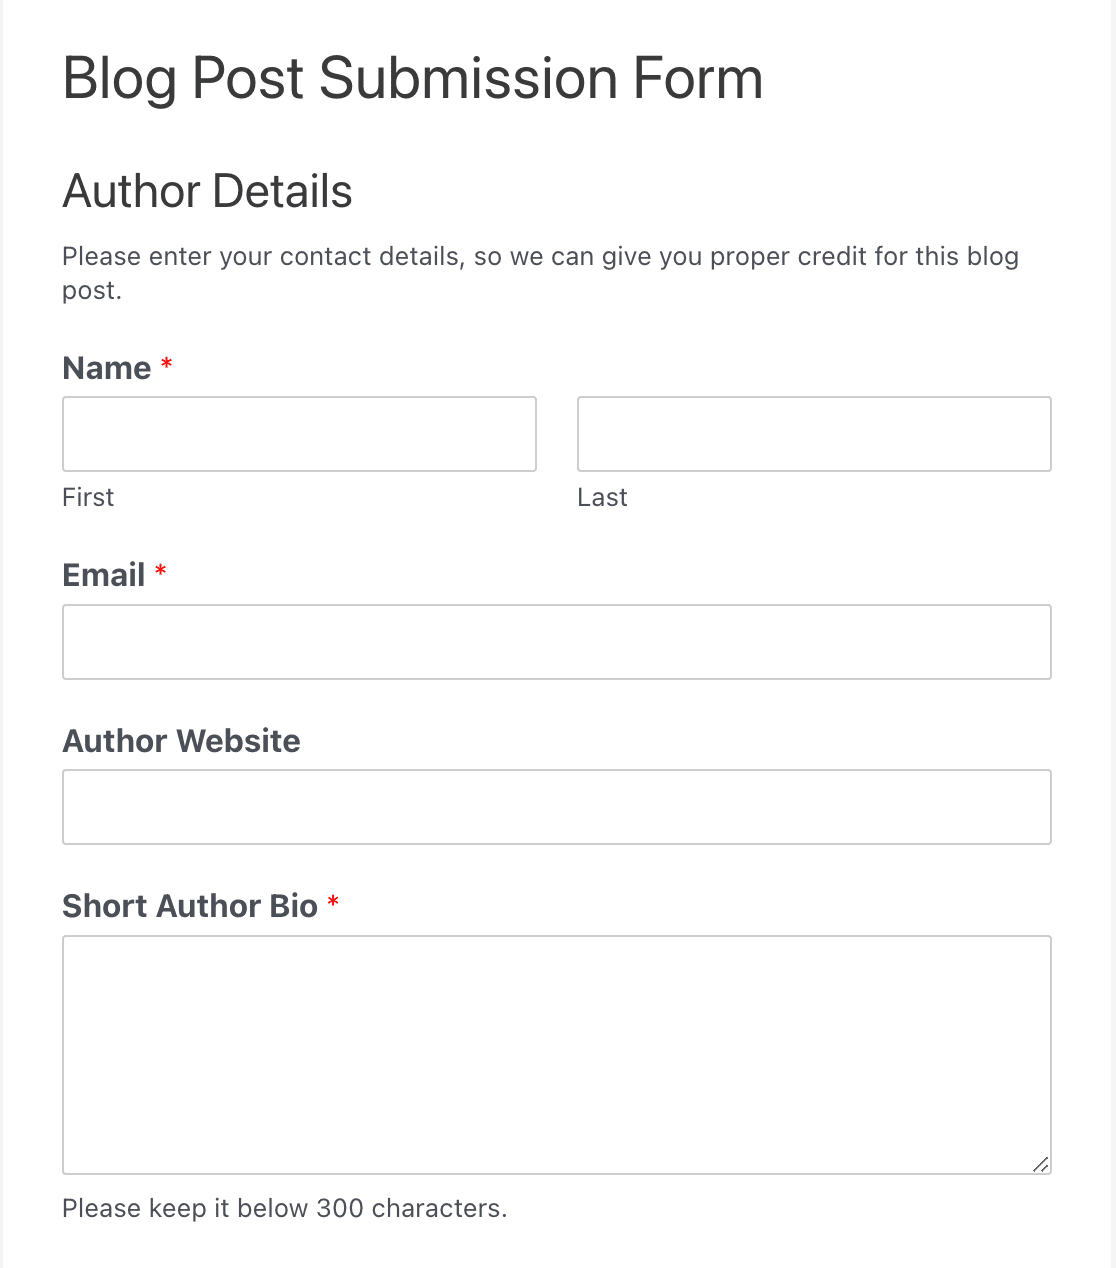 A blog post submission form